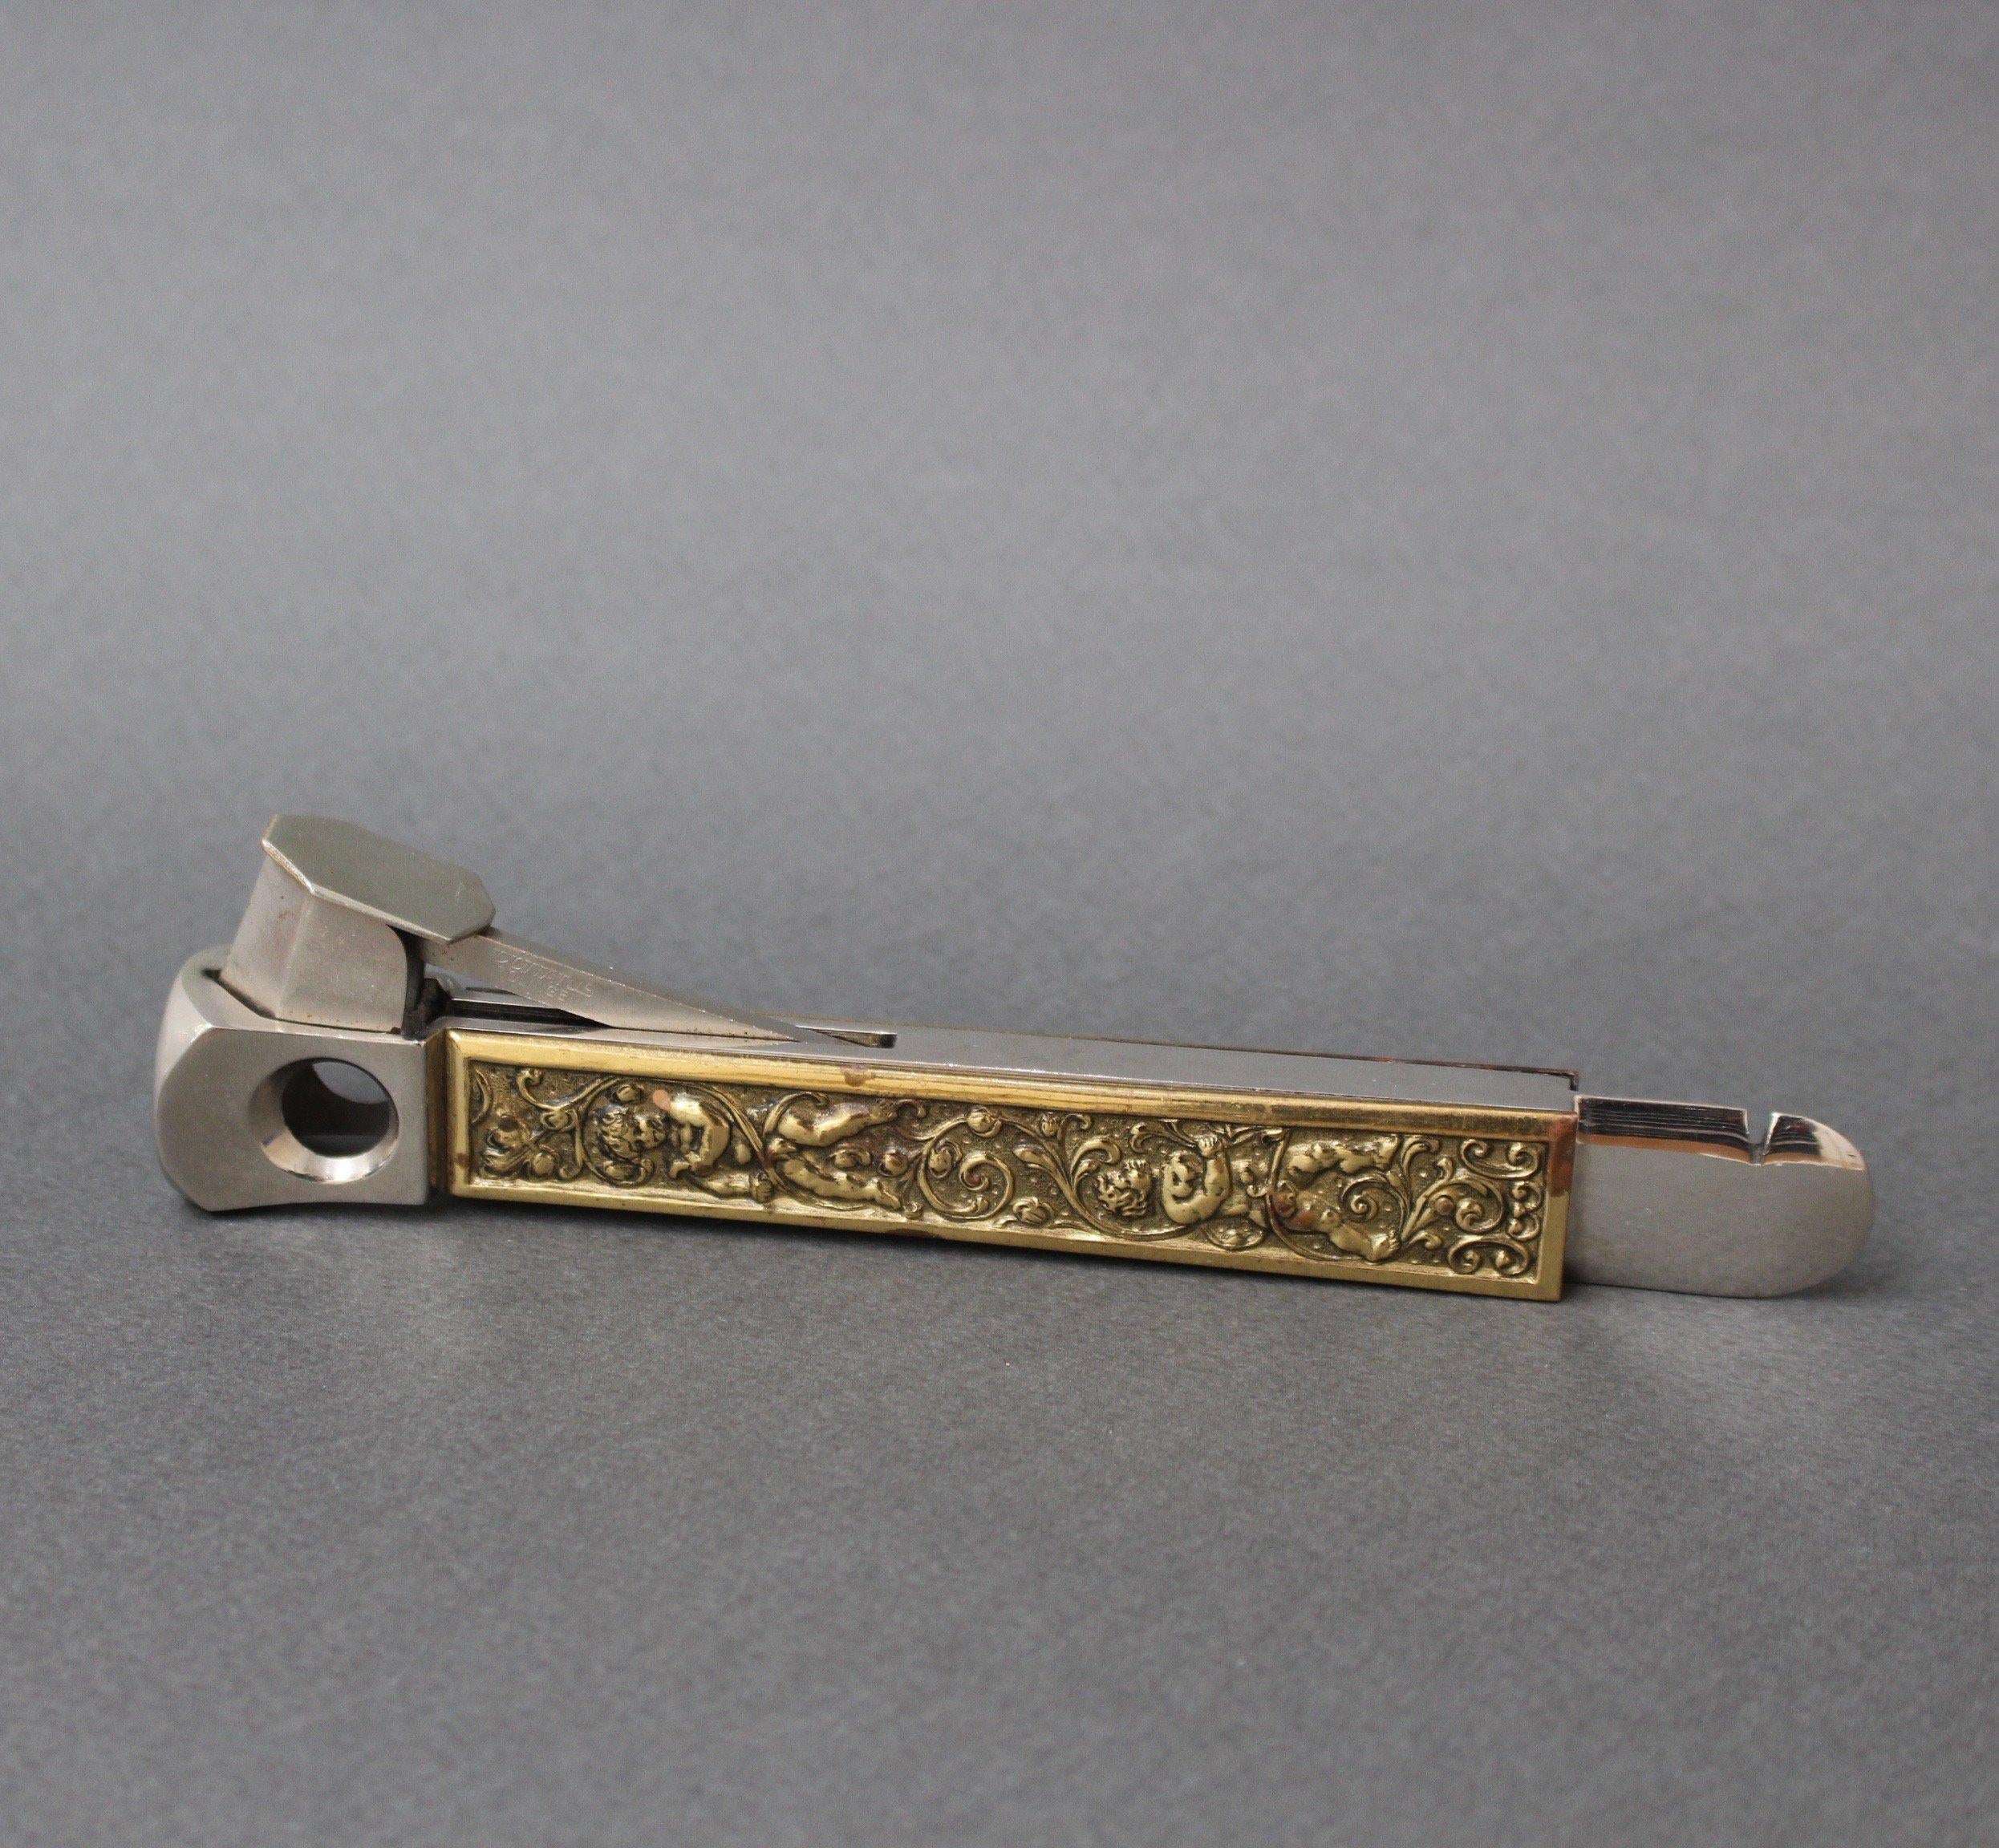 Stainless steel vintage German cigar cutter from Donatus Solingen (circa 1950s). Decorated on the sides with brass relief depicting cherubs and flourishes. Wonderfully charming however, more useful today as a decorative desktop conversation piece